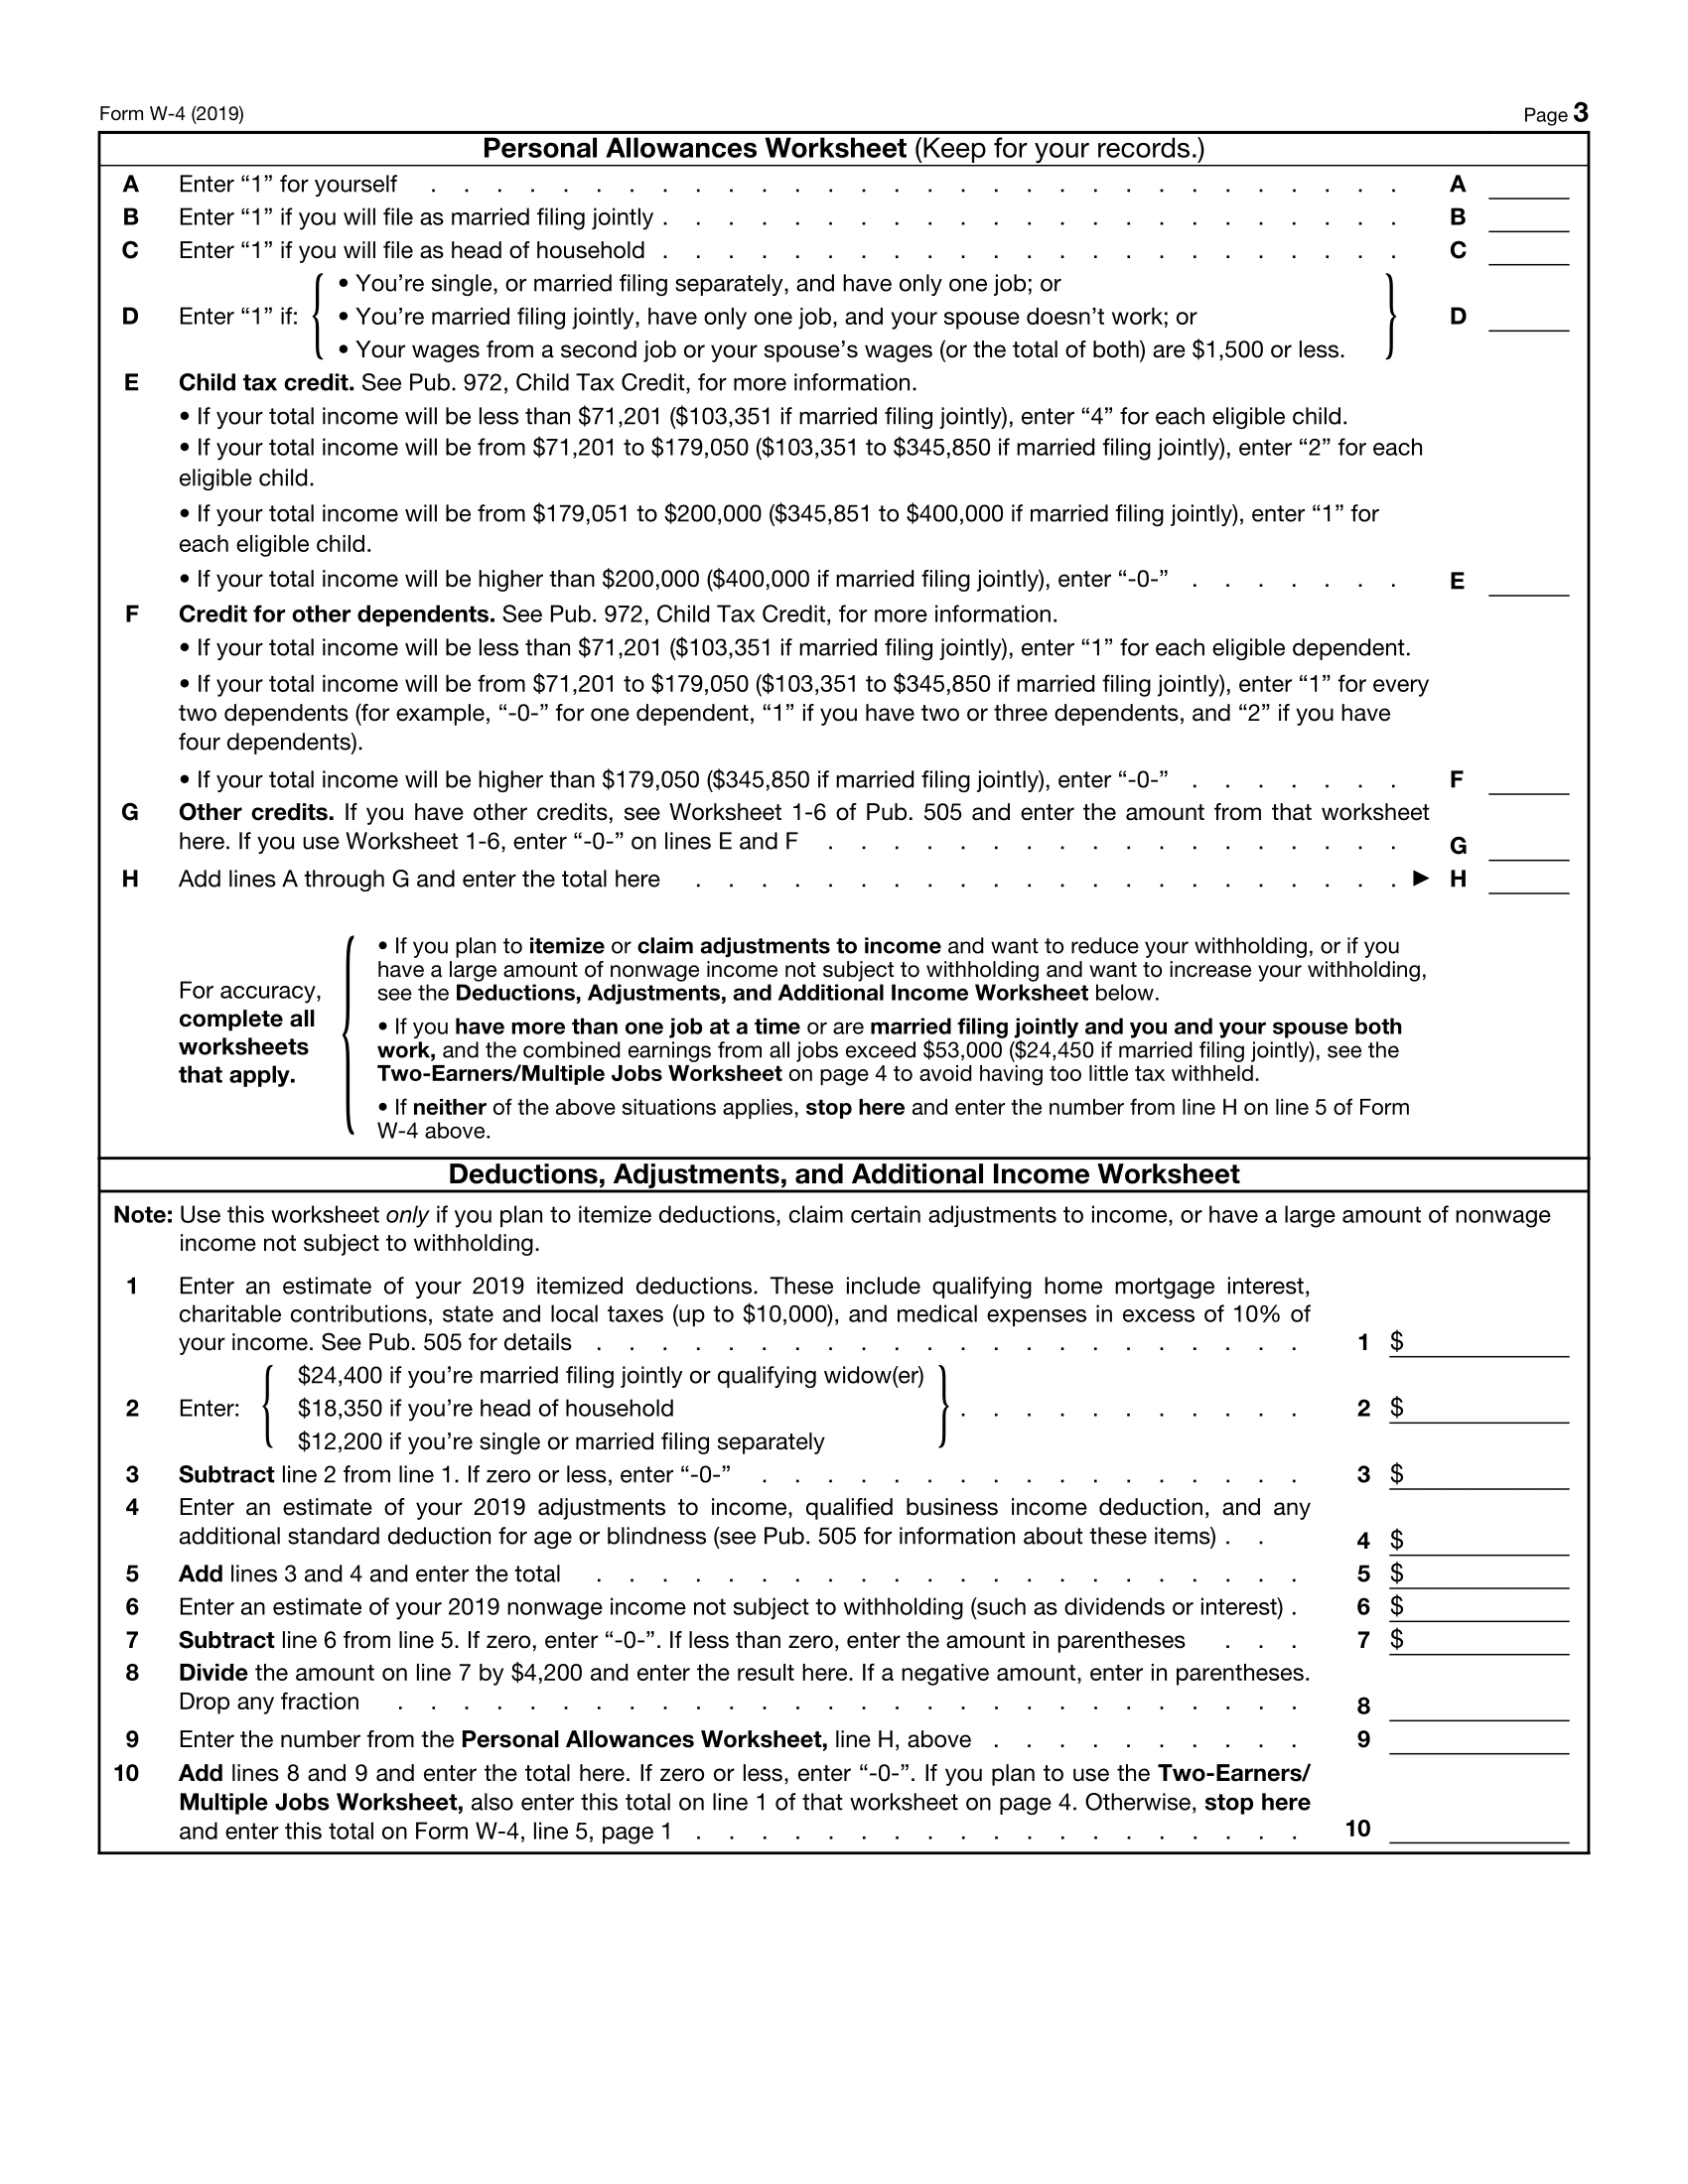 Form W-4 Page 3